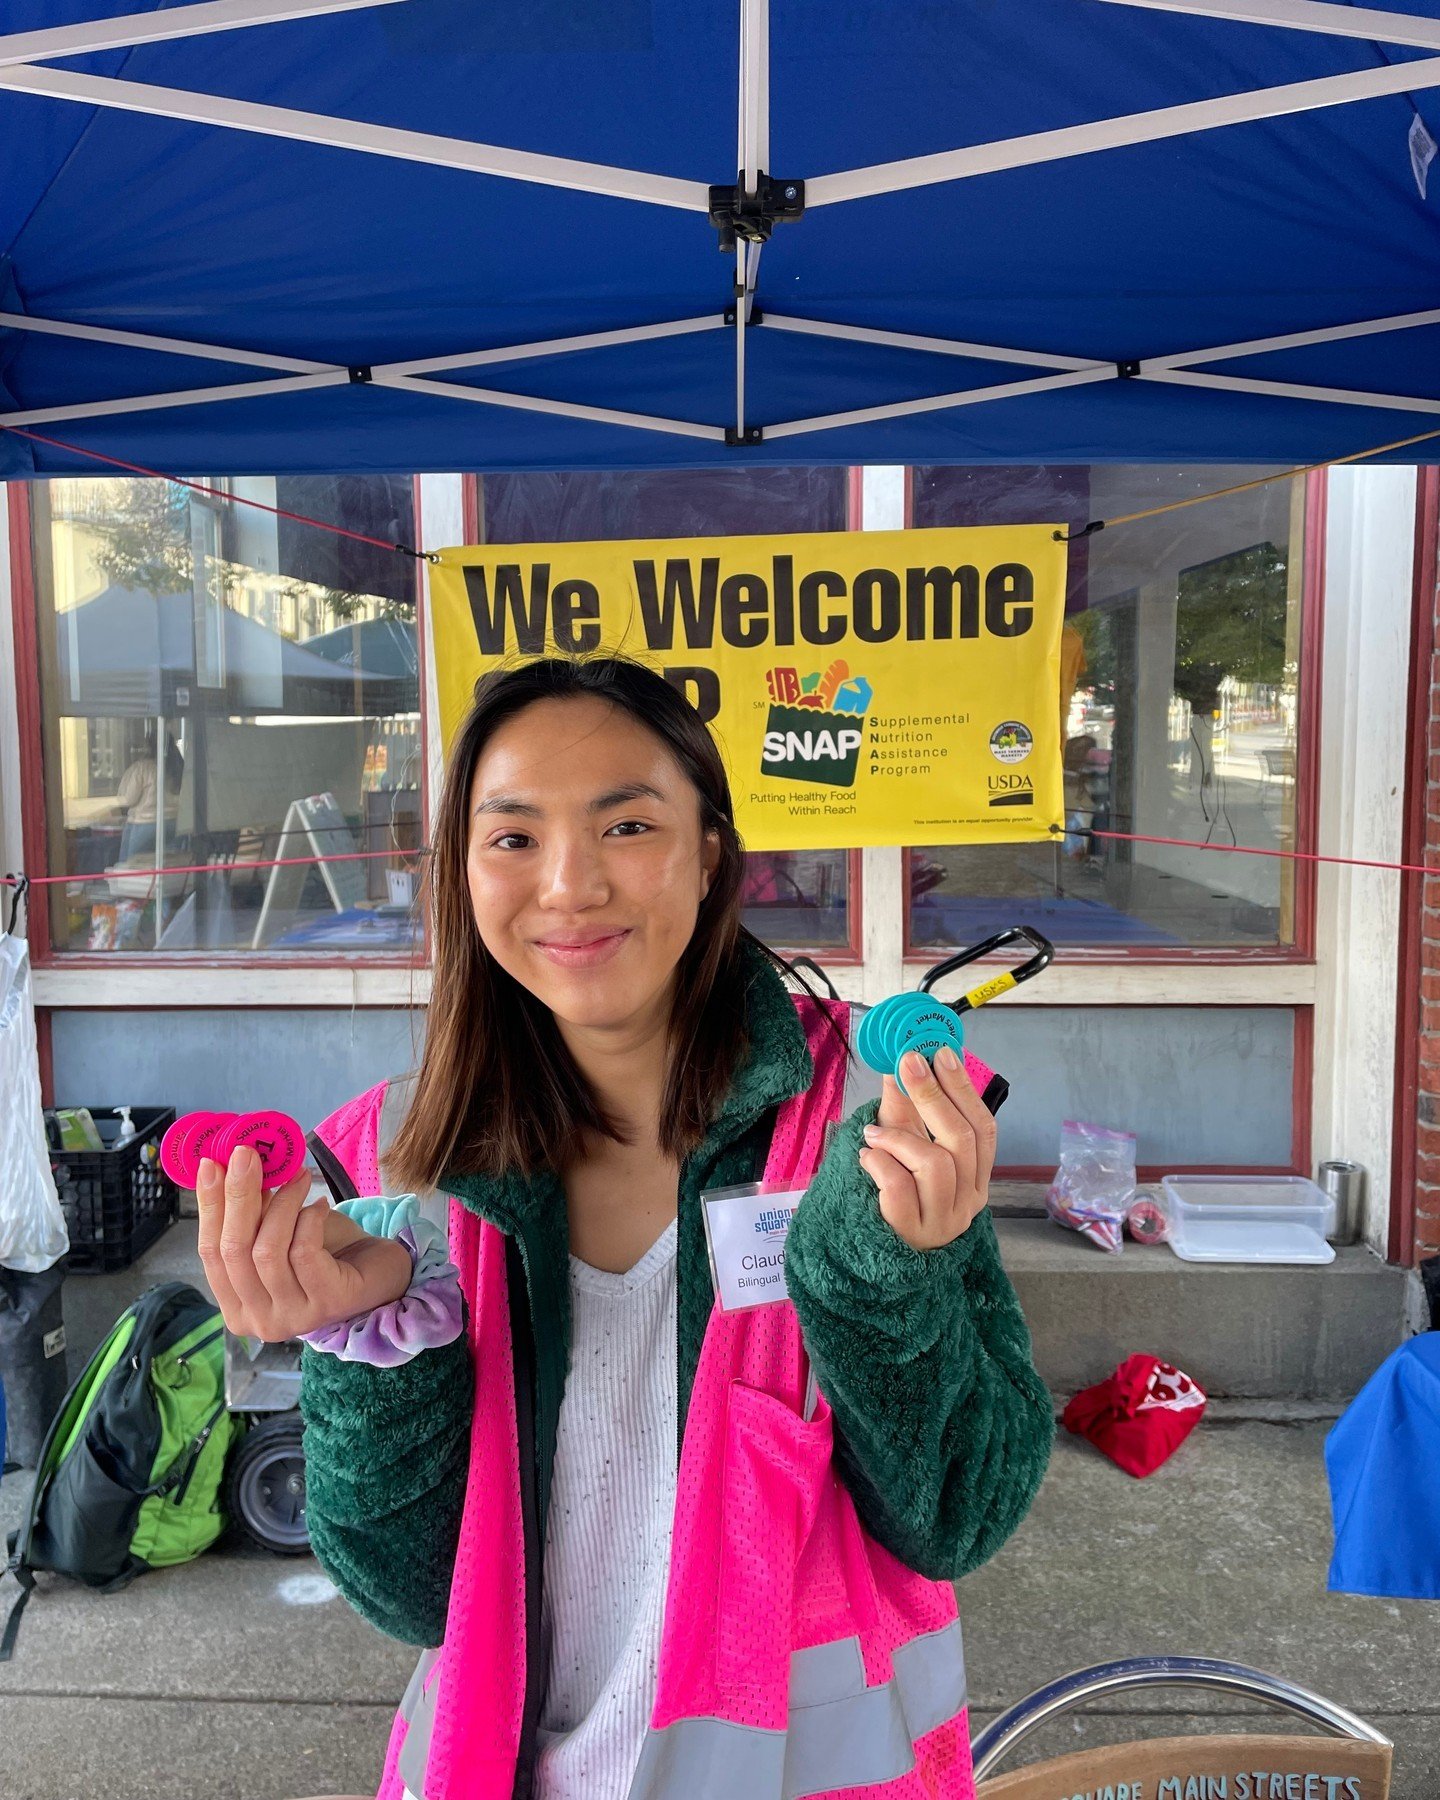 Did you know that you can use SNAP benefits at USFM? 🎊

Here's how it works:
⛺ bring your EBT card to the blue Market Manager's tent
💳 market staff will swipe your card and deduct what you'd like to spend from your SNAP account
✨ we'll double what'